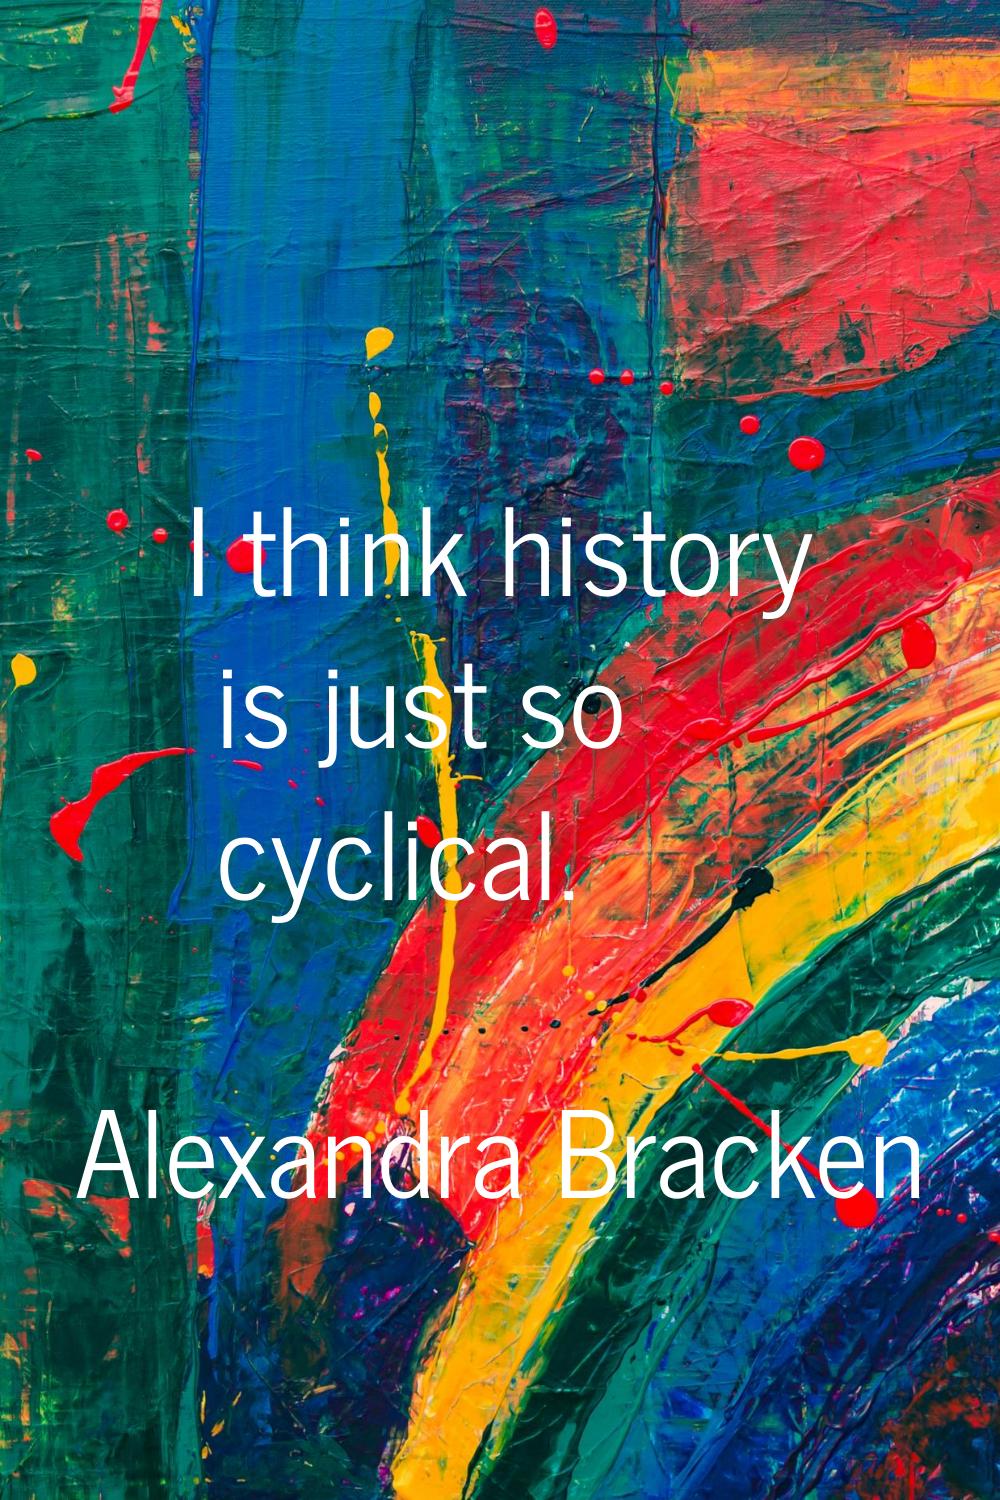 I think history is just so cyclical.